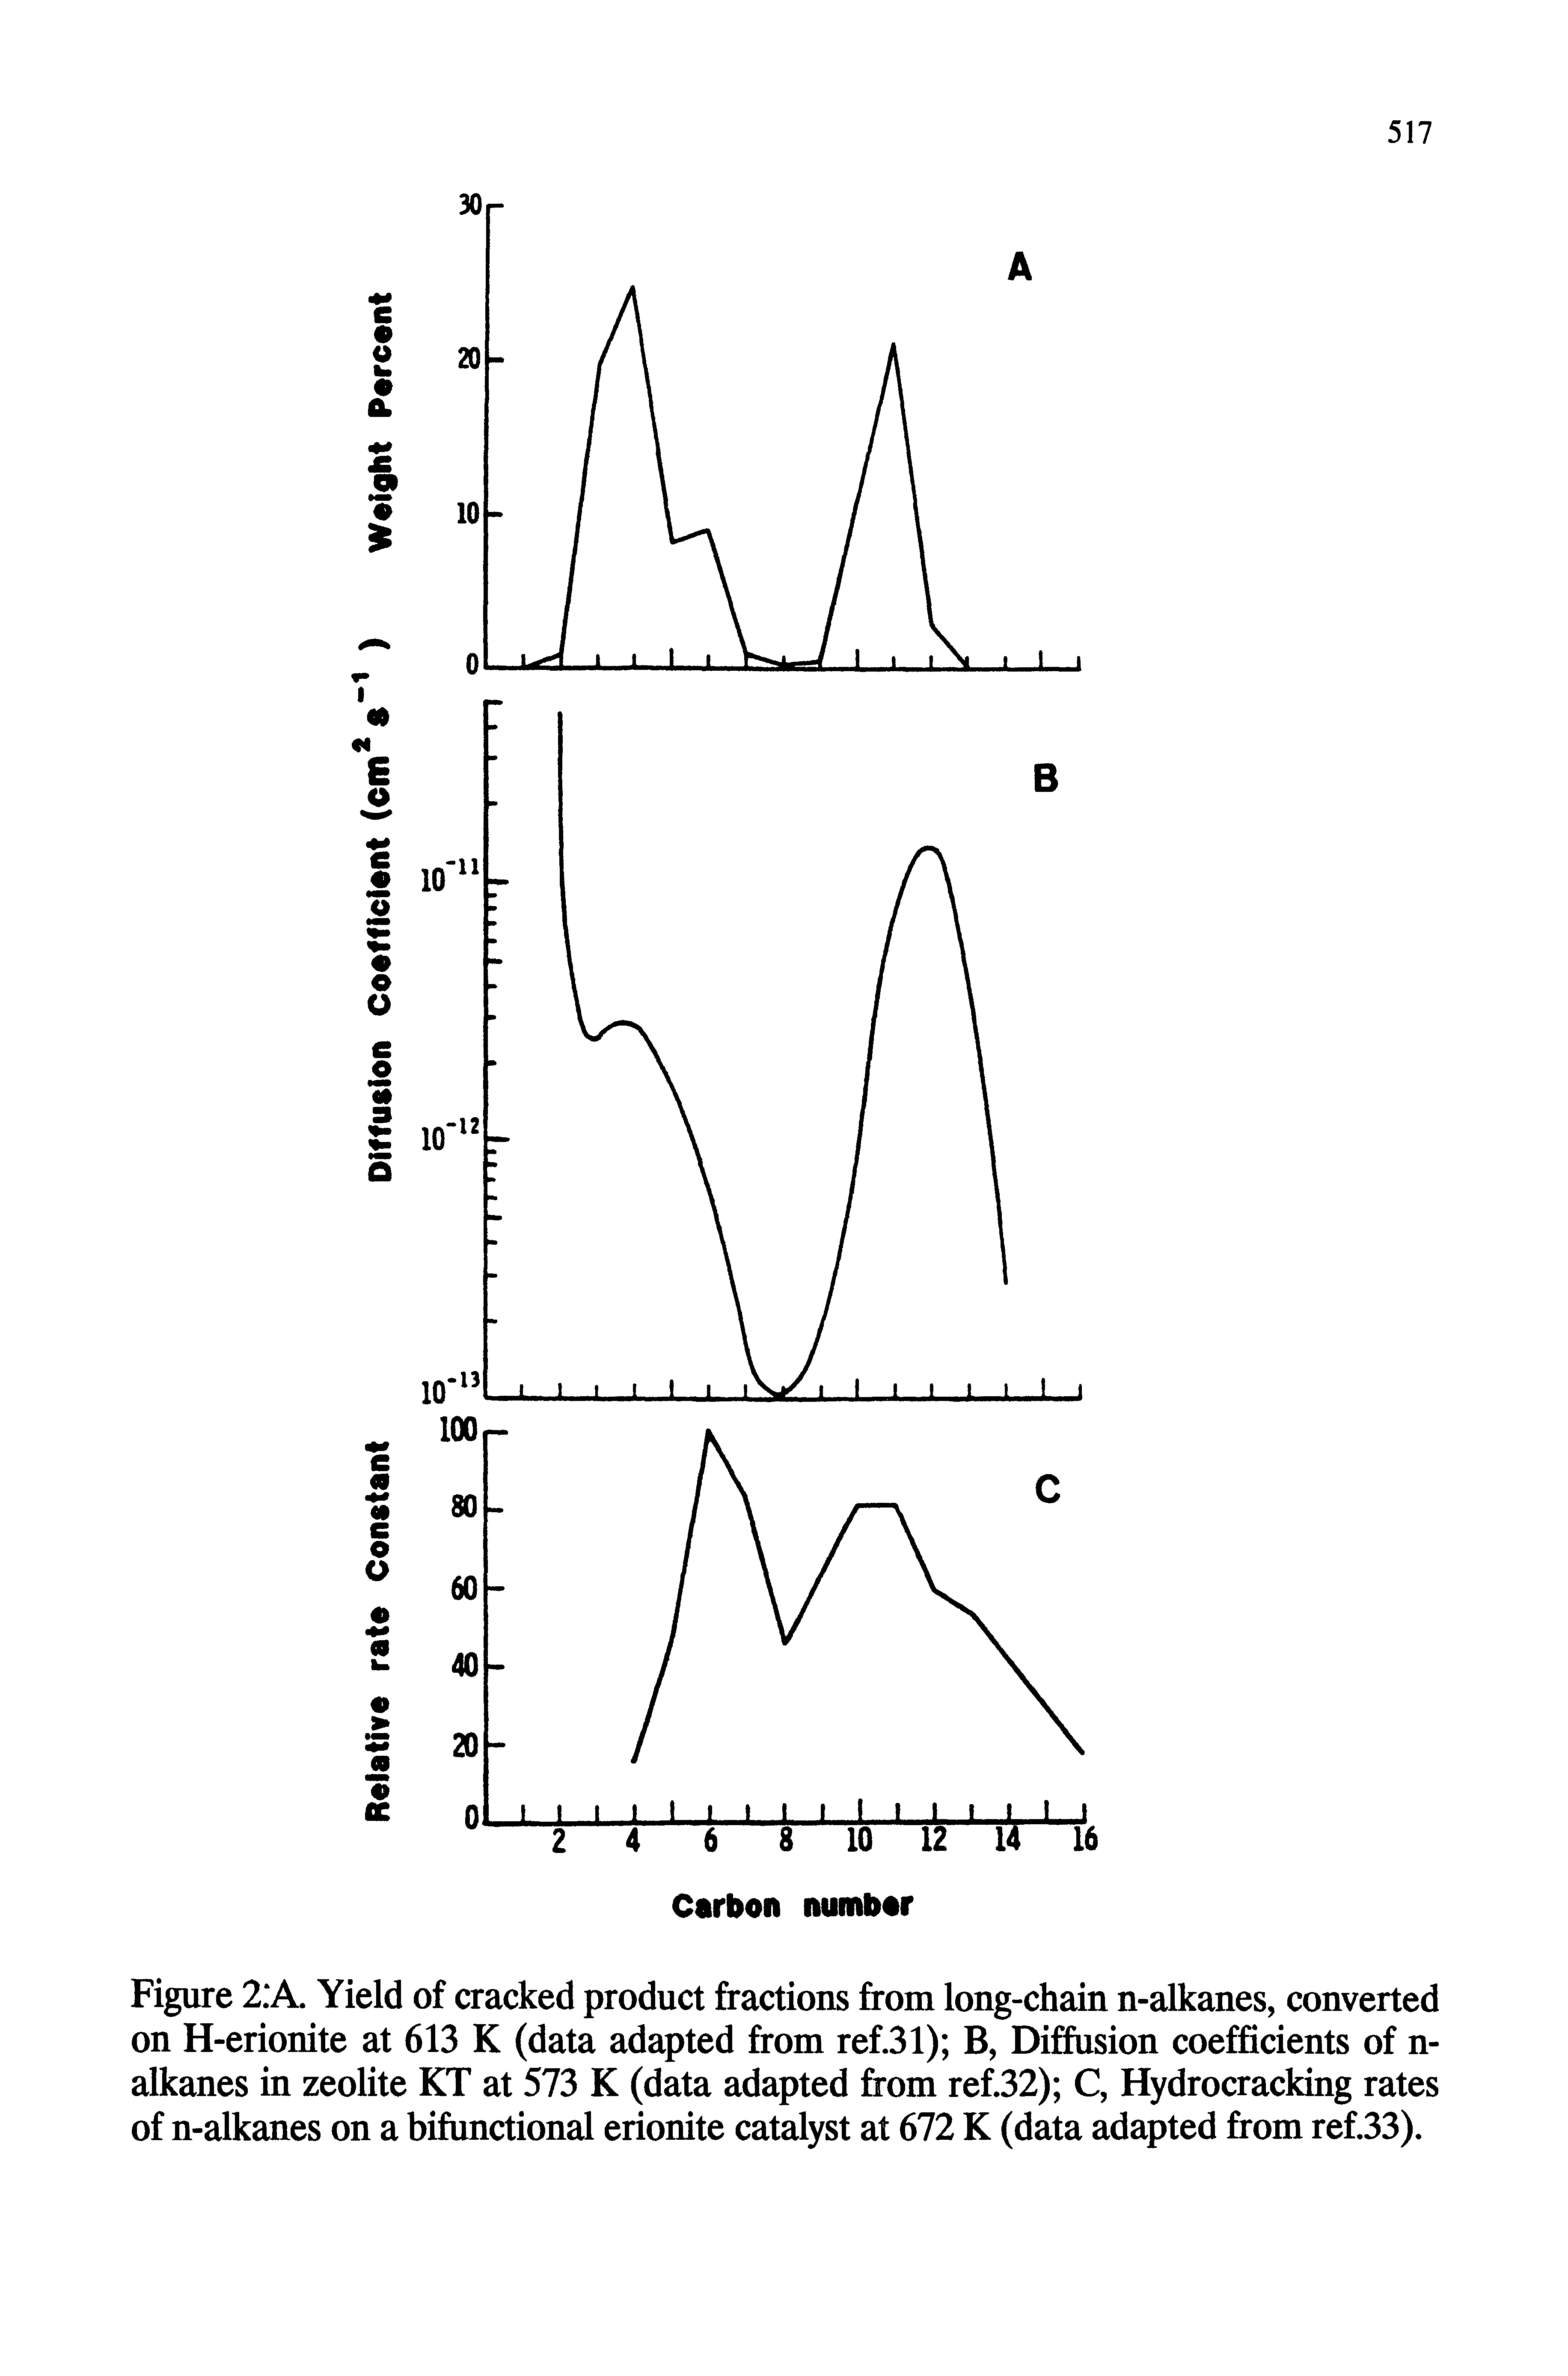 Figure 2 A. Yield of cracked product fractions from long-chain n-alkanes, converted on H-erionite at 613 K (data adapted from ref.31) B, Difrusion coefficients of n-alkanes in zeolite KT at 573 K (data adapted from refJ32) C, Hydroaacking rates of n-alkanes on a bifunctional erionite catalyst at 672 K (data adapted from ref.33).